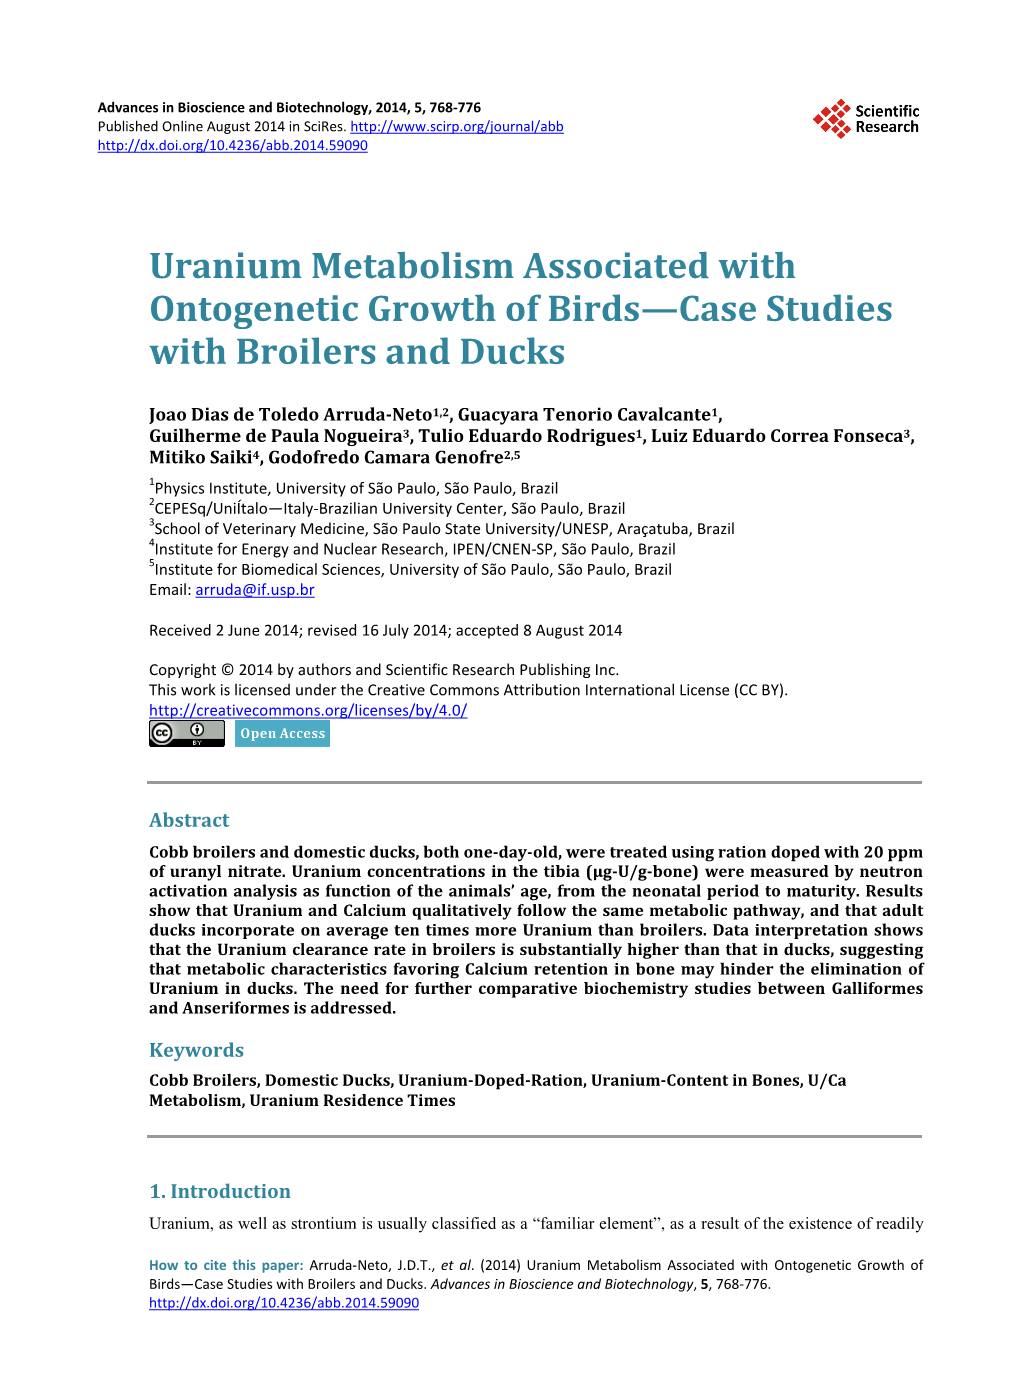 Uranium Metabolism Associated with Ontogenetic Growth of Birds—Case Studies with Broilers and Ducks